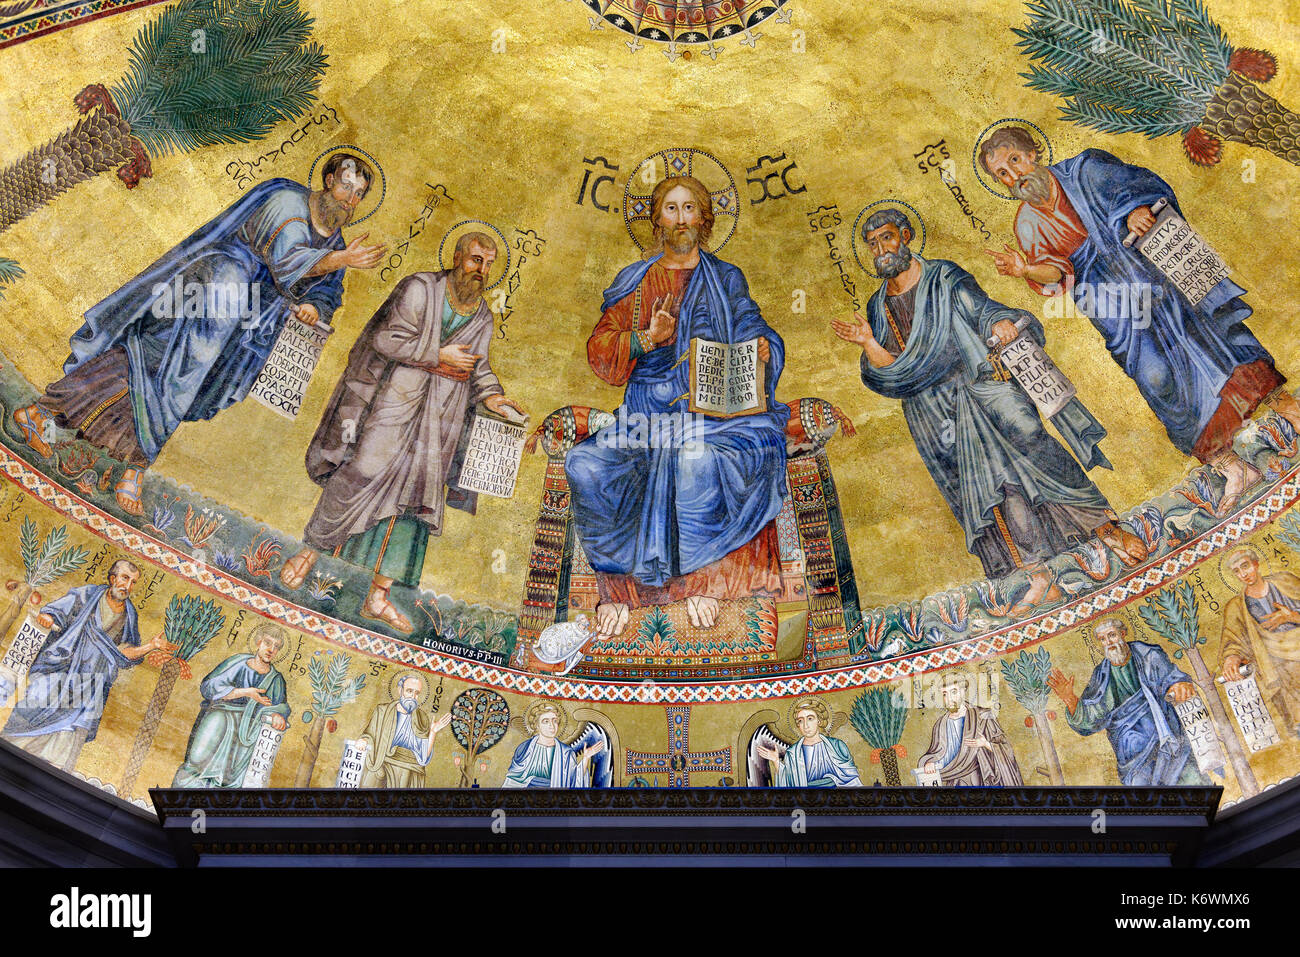 Mosaic in apse, Christ with Apostles Peter, Andrew and Paul and Lucas, Mosaic, Basilica of San Paolo fuori le Mura, Rome, Italy Stock Photo